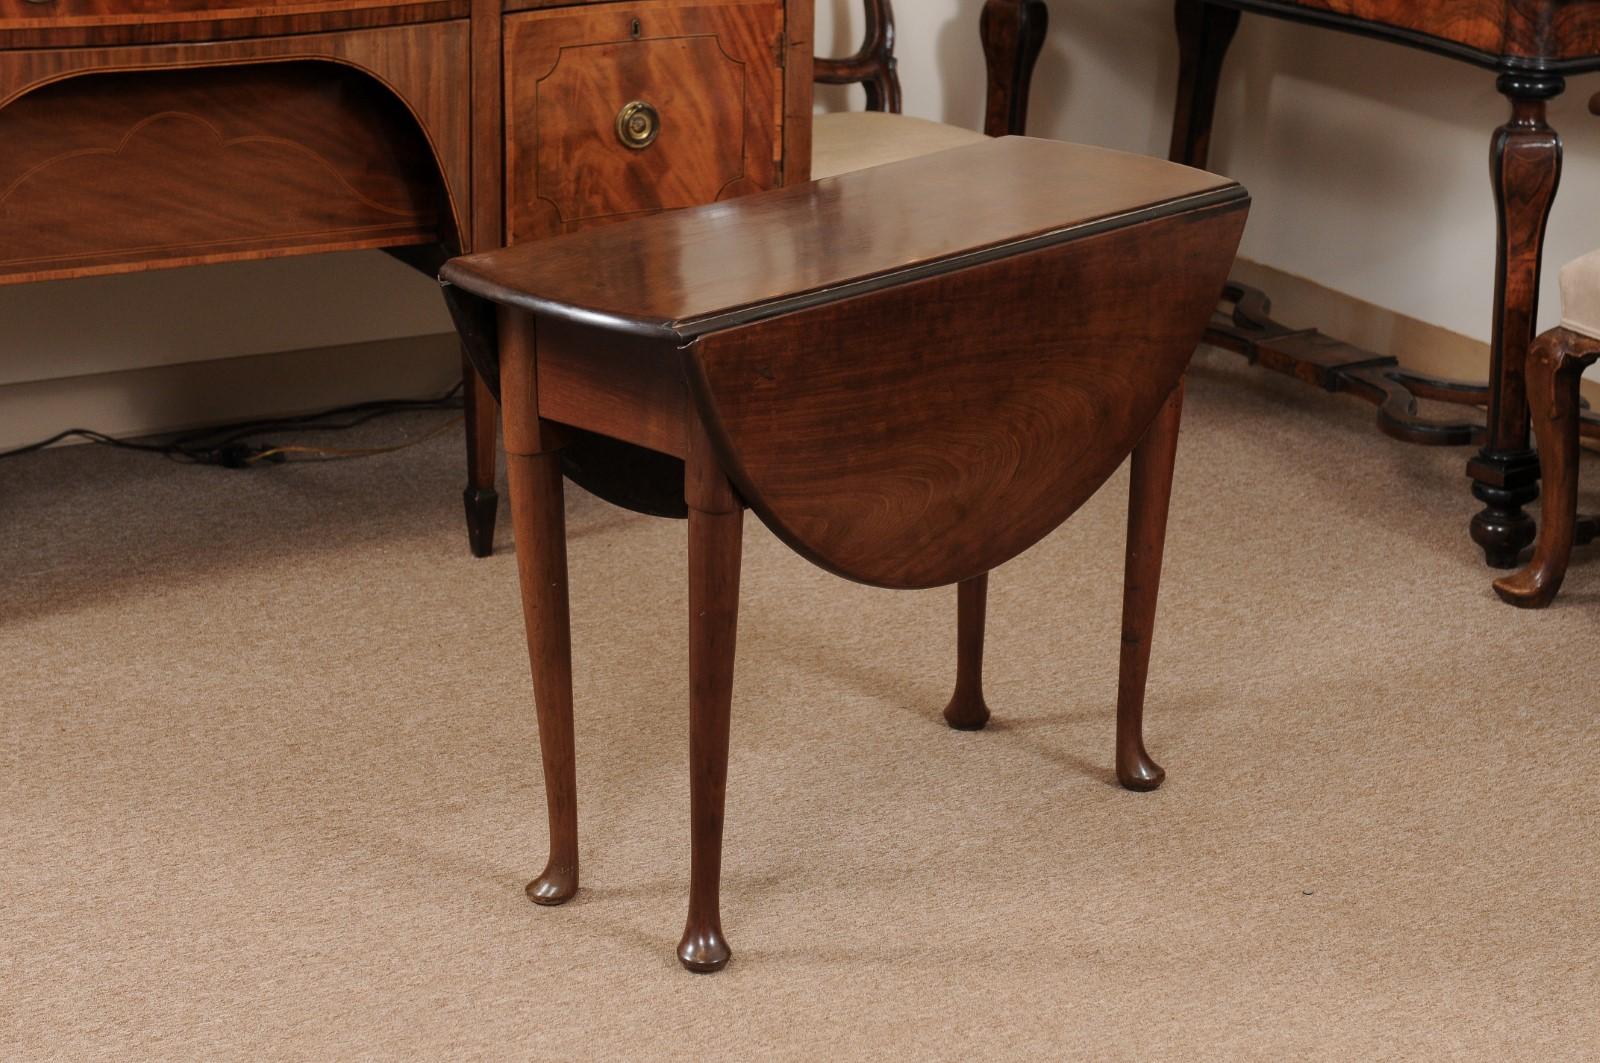 Queen Anne Drop Leaf Table in Walnut with Pad Feet 1